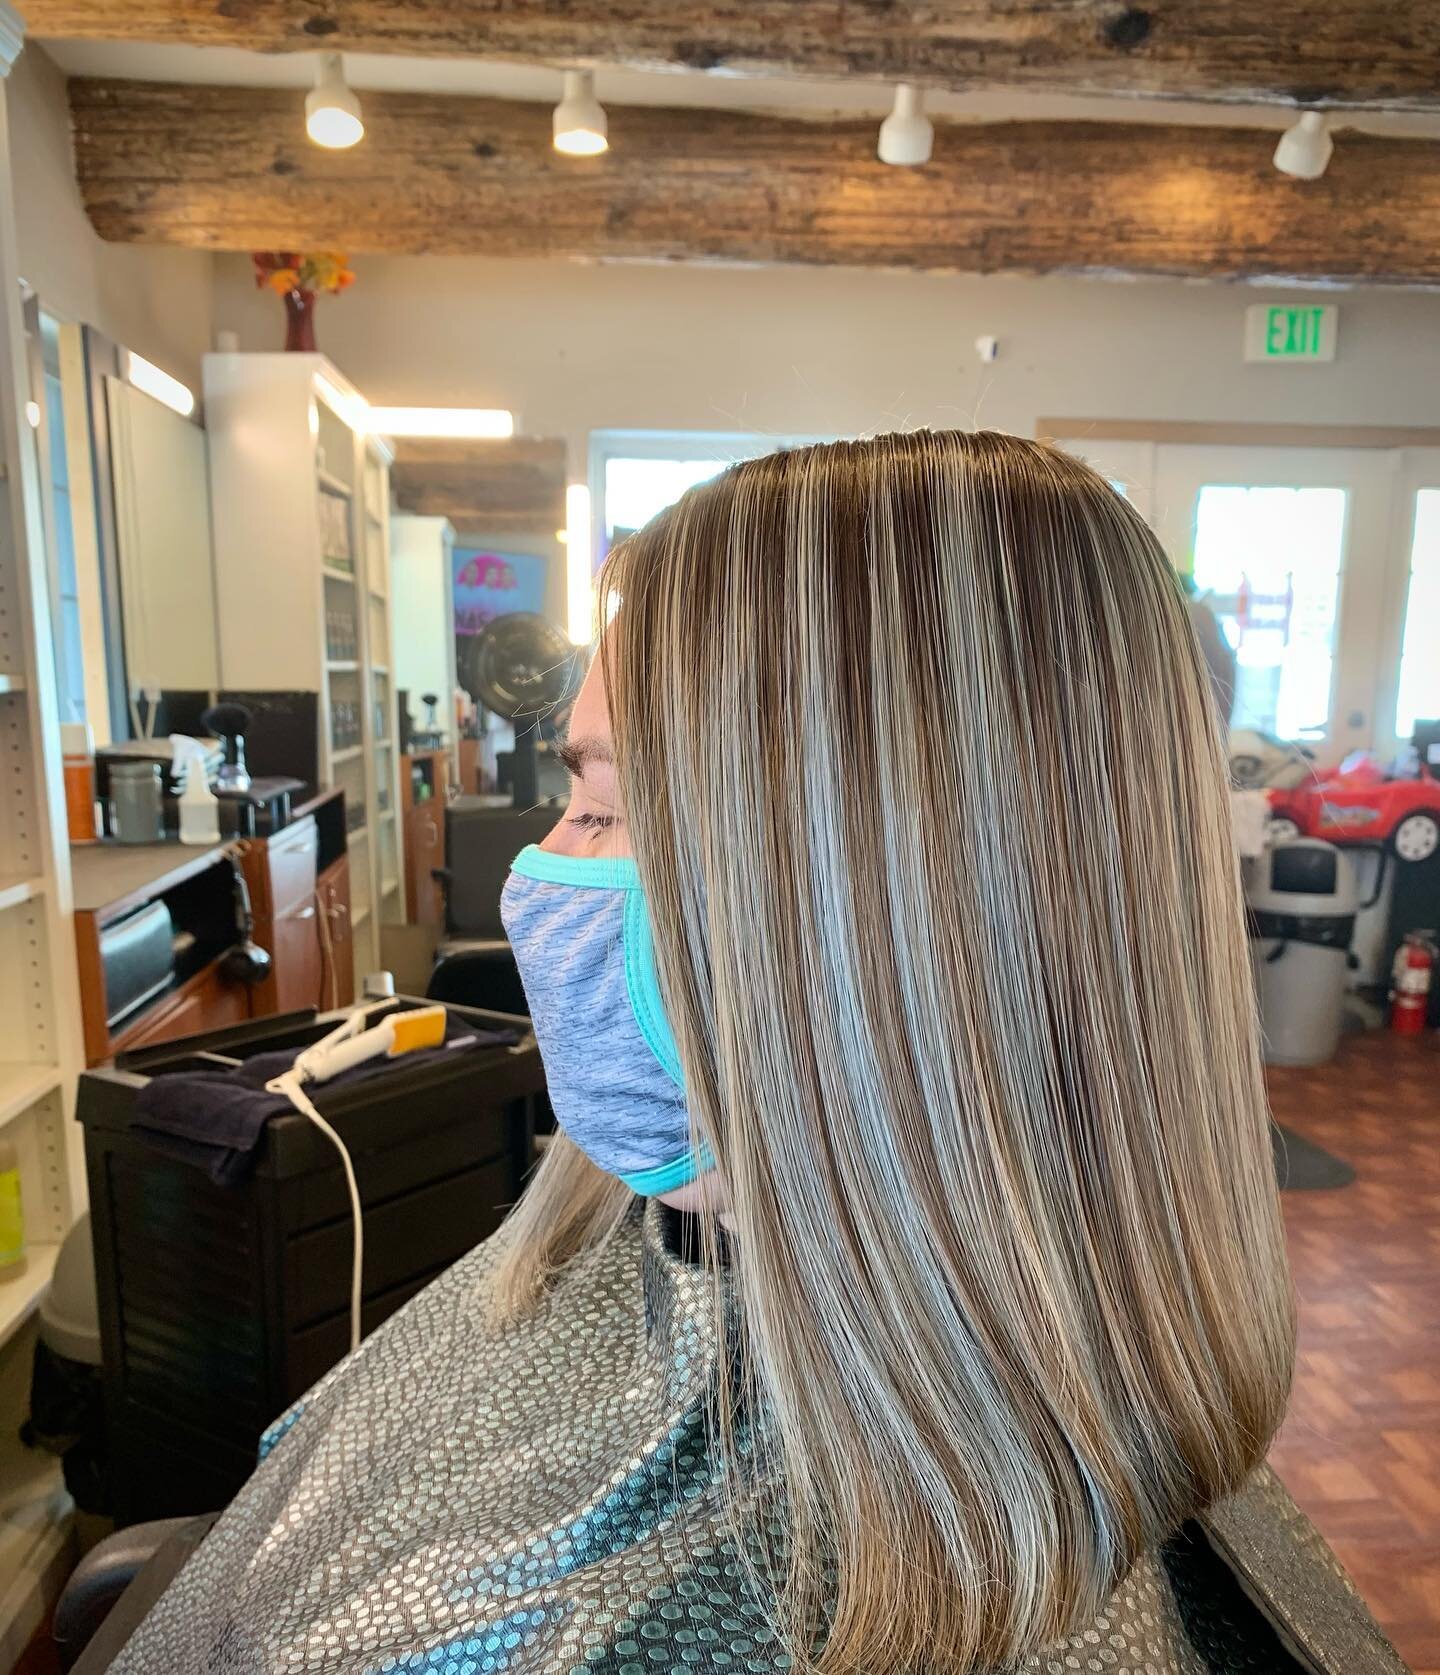 Highlights 🤩

Luces 🤩